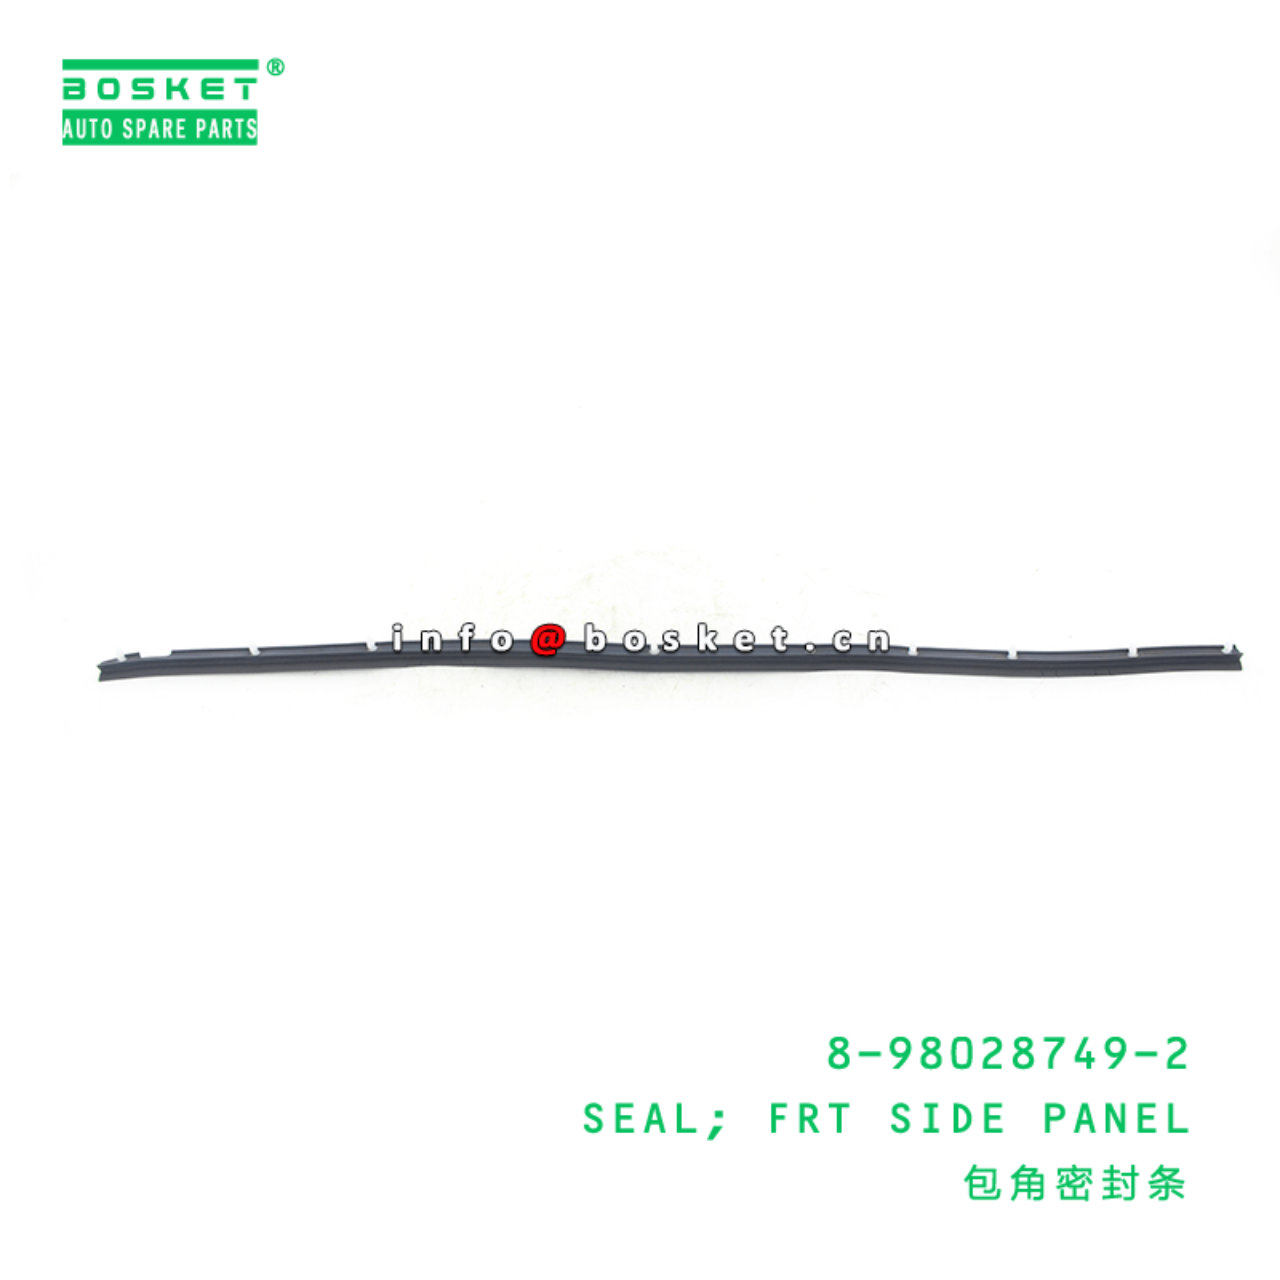 8-98028749-2 Front Side Panel Seal 8980287492 Suitable for ISUZU NMR